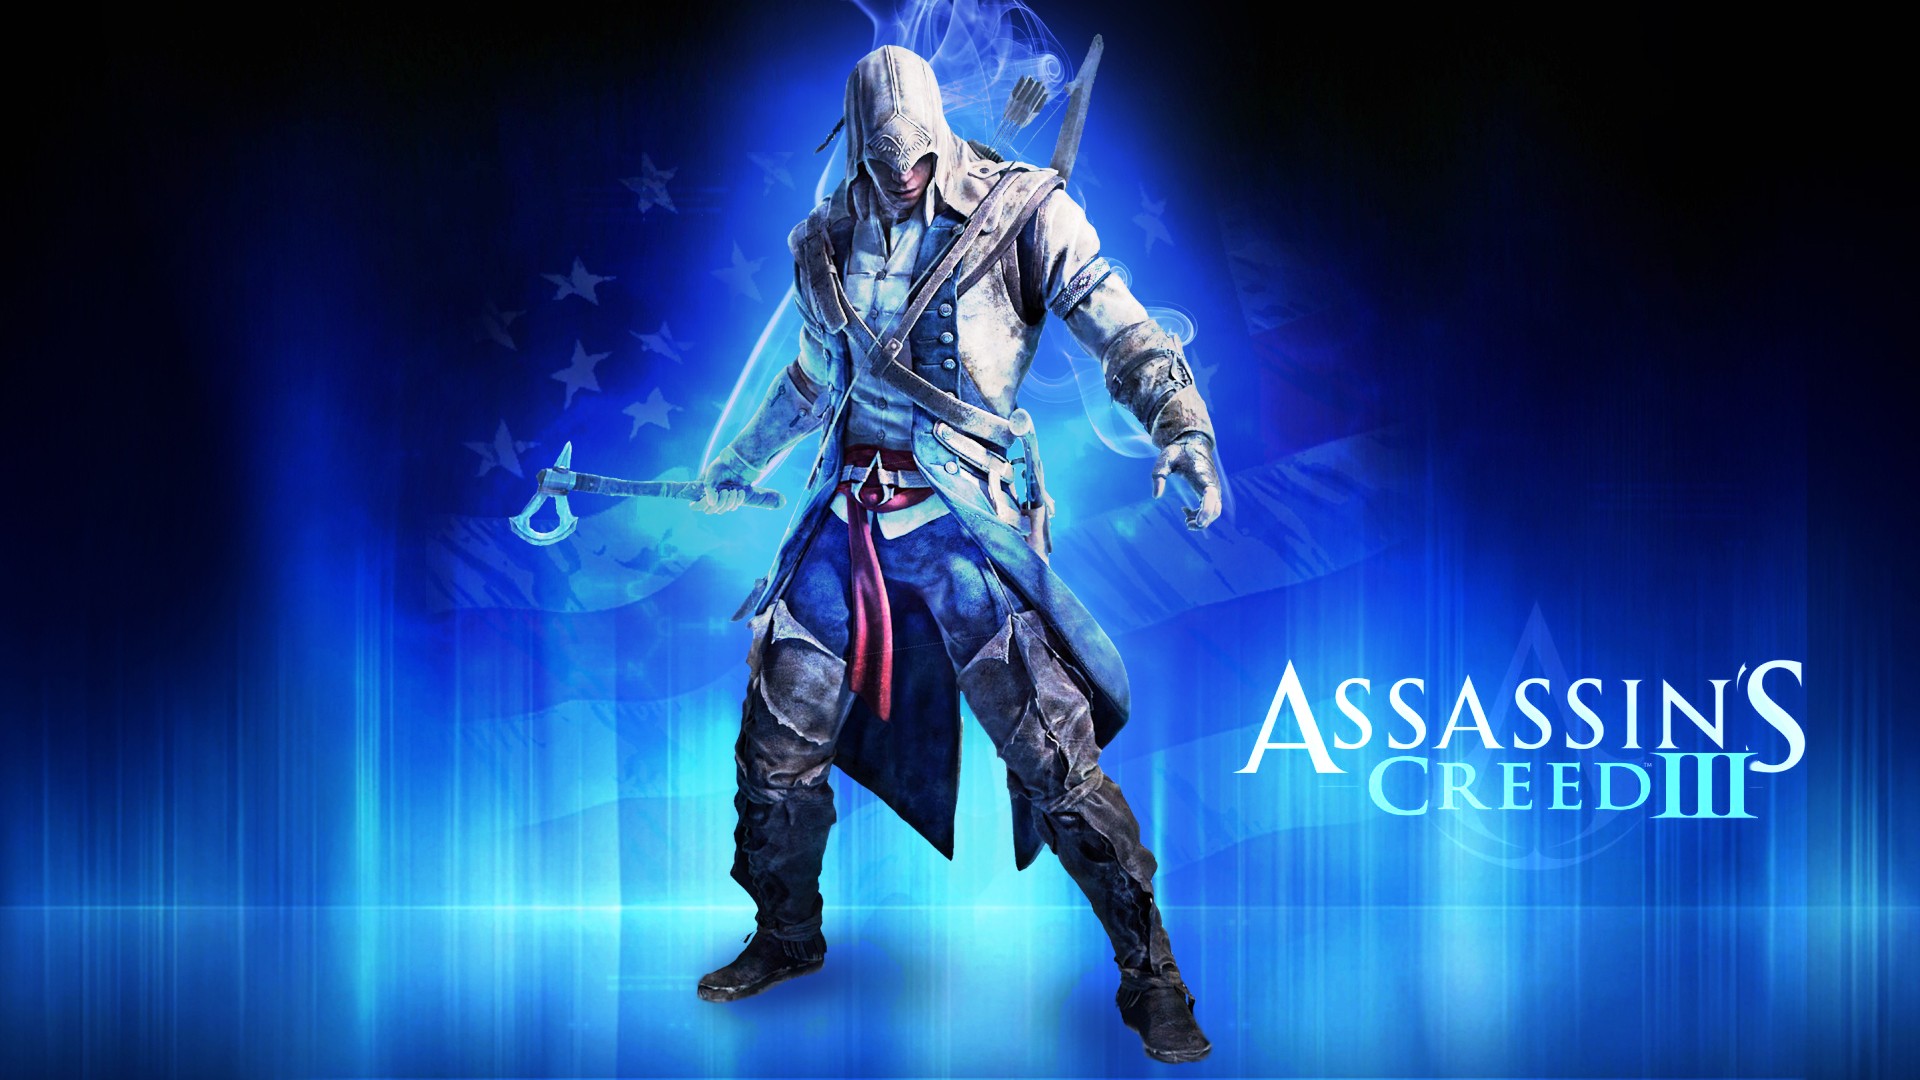 Free download Assassins Creed 3 Wallpapers 6 HD Desktop Wallpapers  [1920x1080] for your Desktop, Mobile & Tablet | Explore 49+ Assassin's Creed  Desktop Wallpaper | Assassins Creed 2 Wallpapers, Assassins Creed 3  Wallpaper, Assassins Creed Brotherhood ...